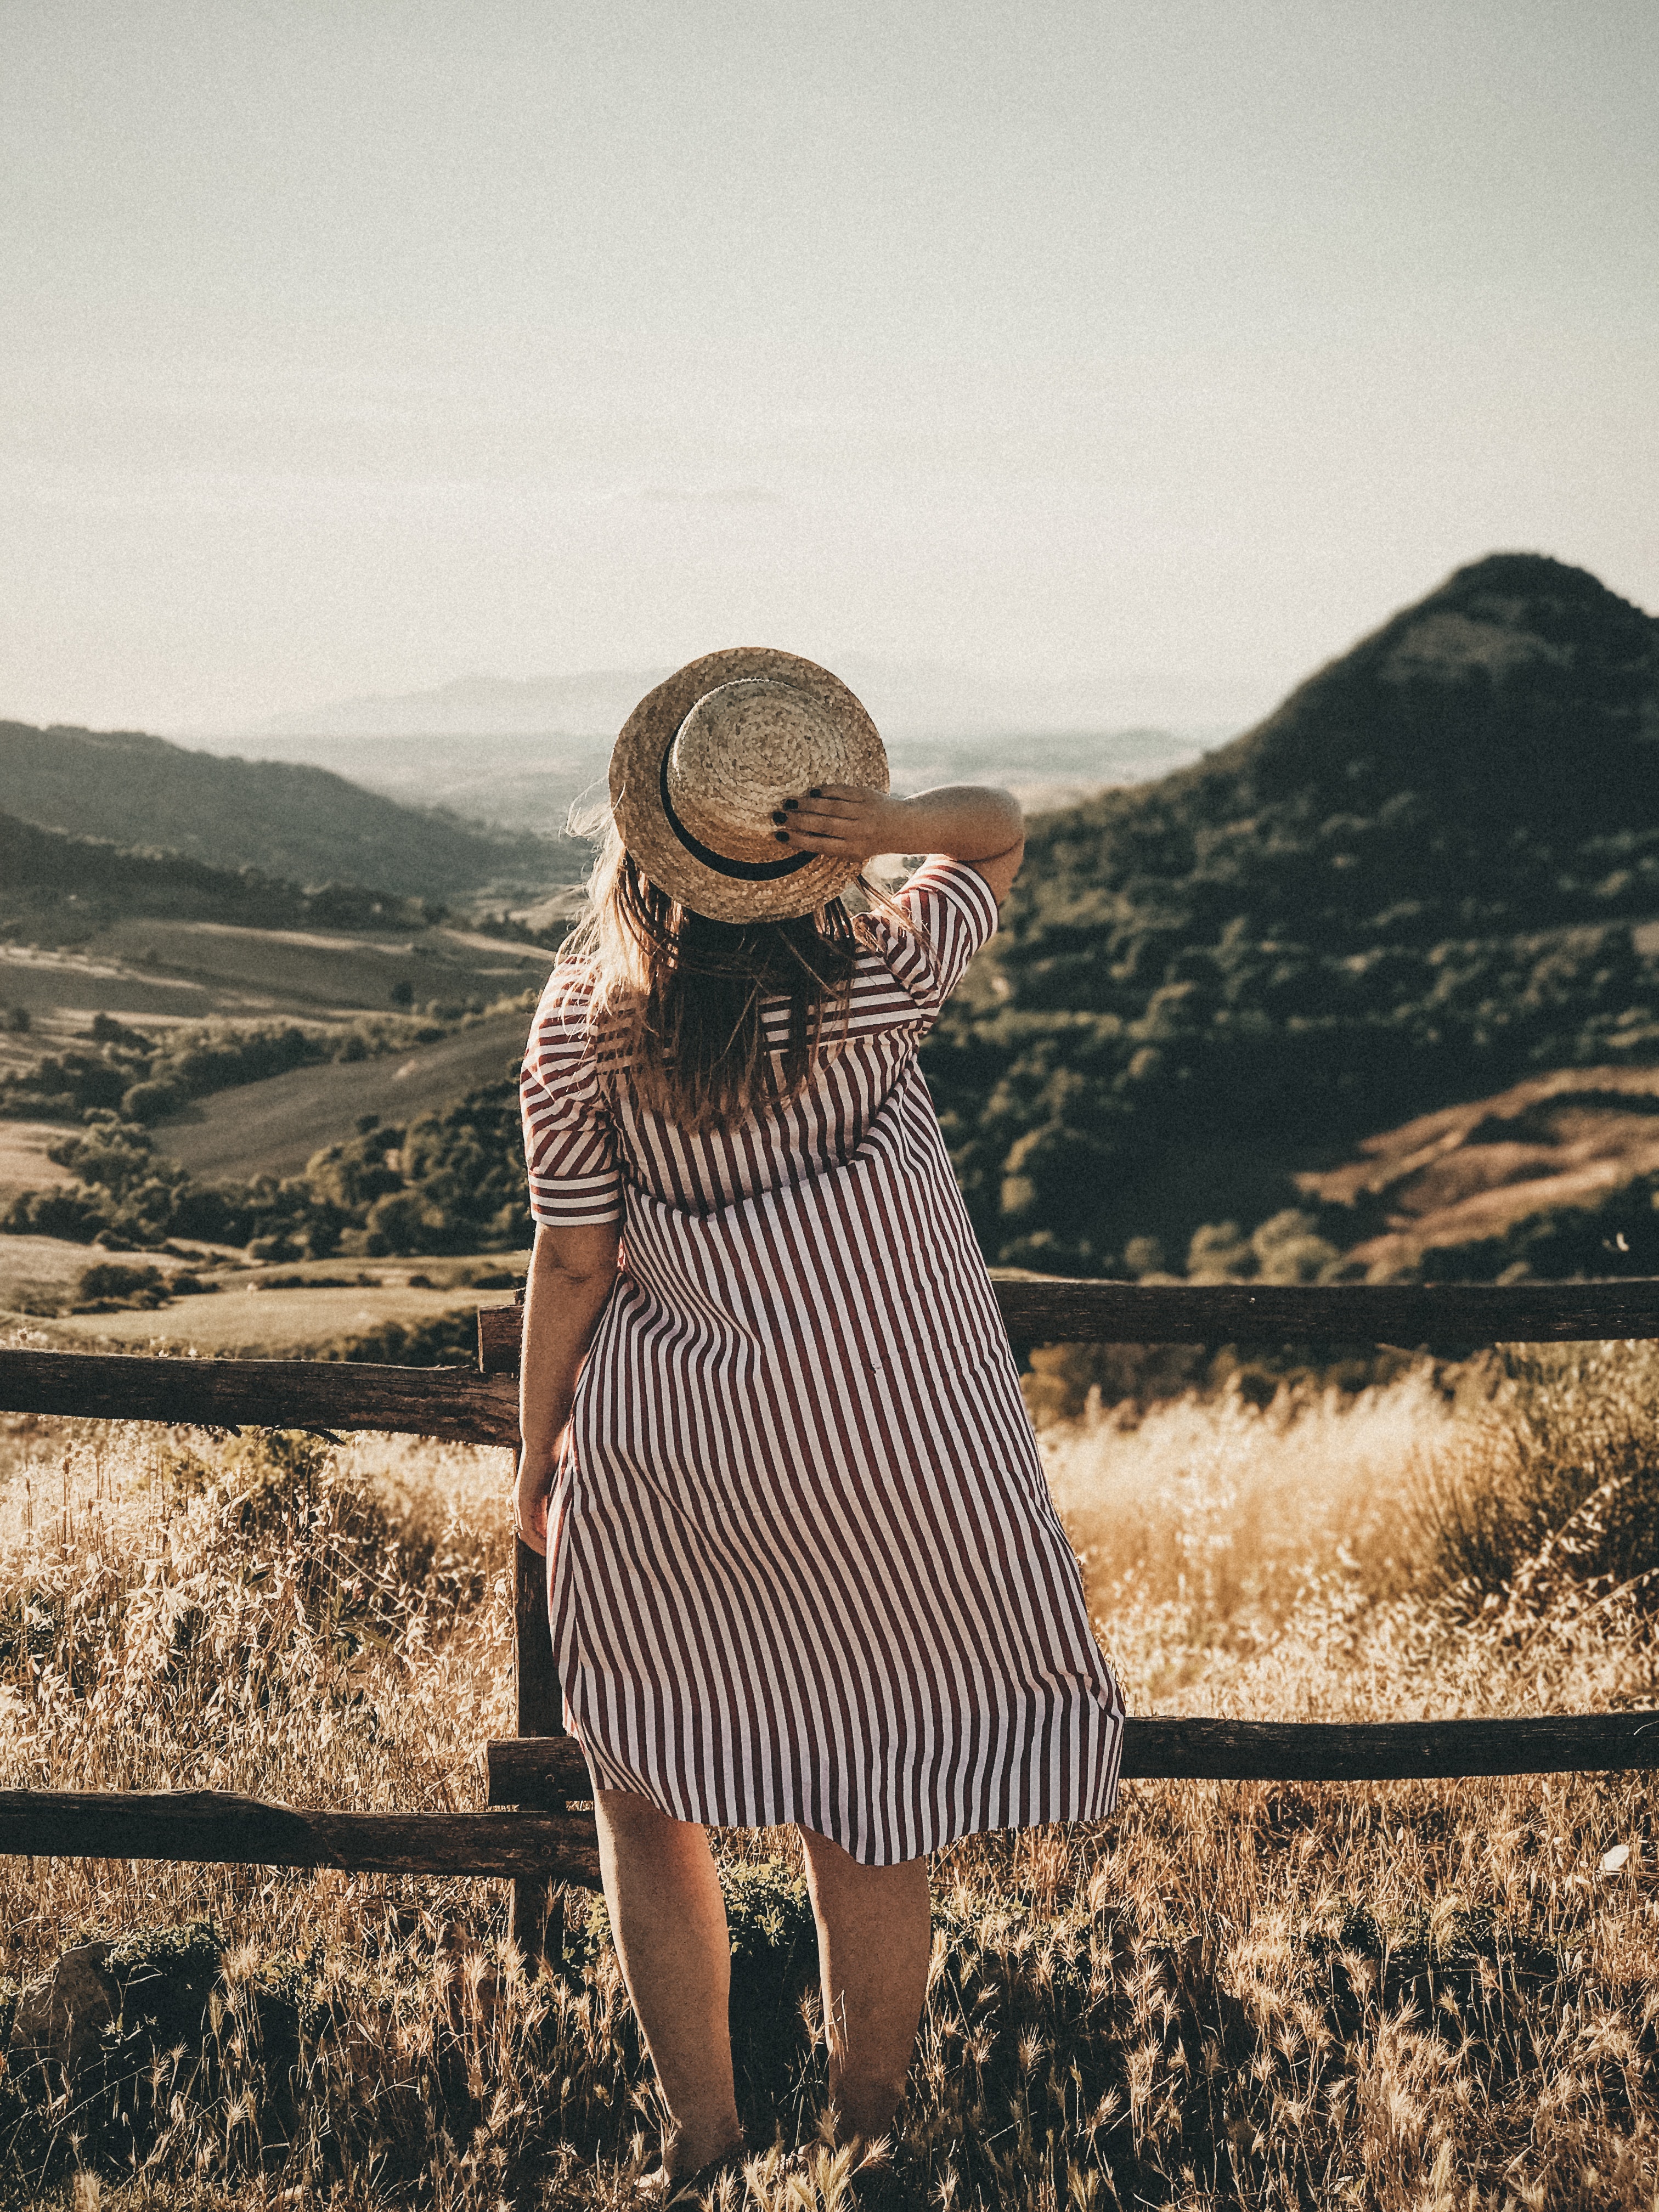 Selective focus photography of a woman holding a brown straw hat